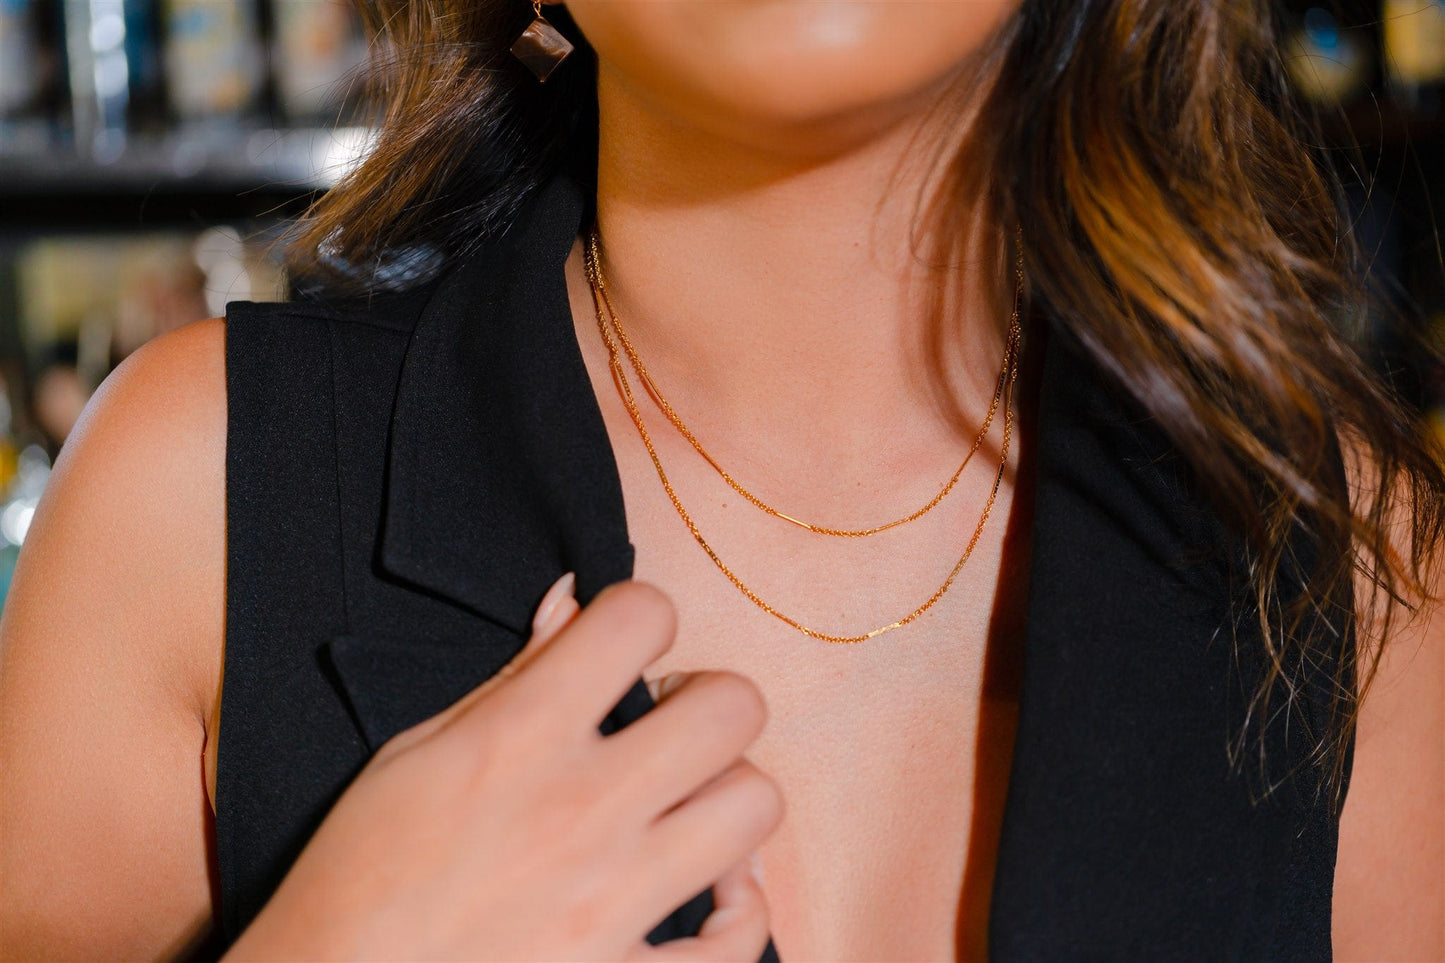 14k gold double layered chain necklace - VUE by SEK